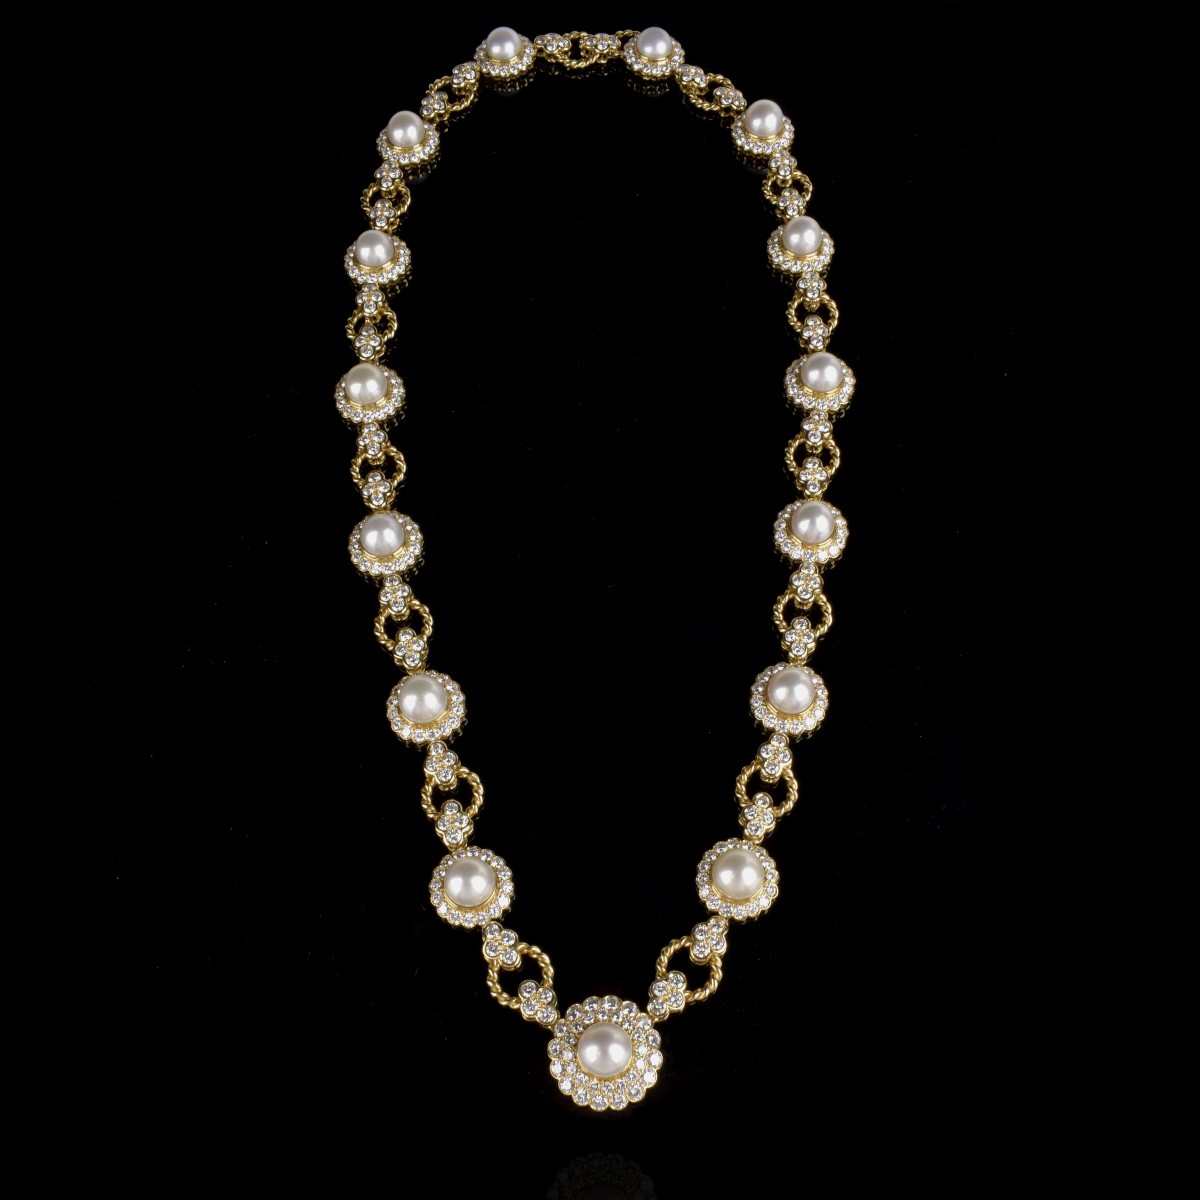 40ct Diamond, Pearl and 18K Suite